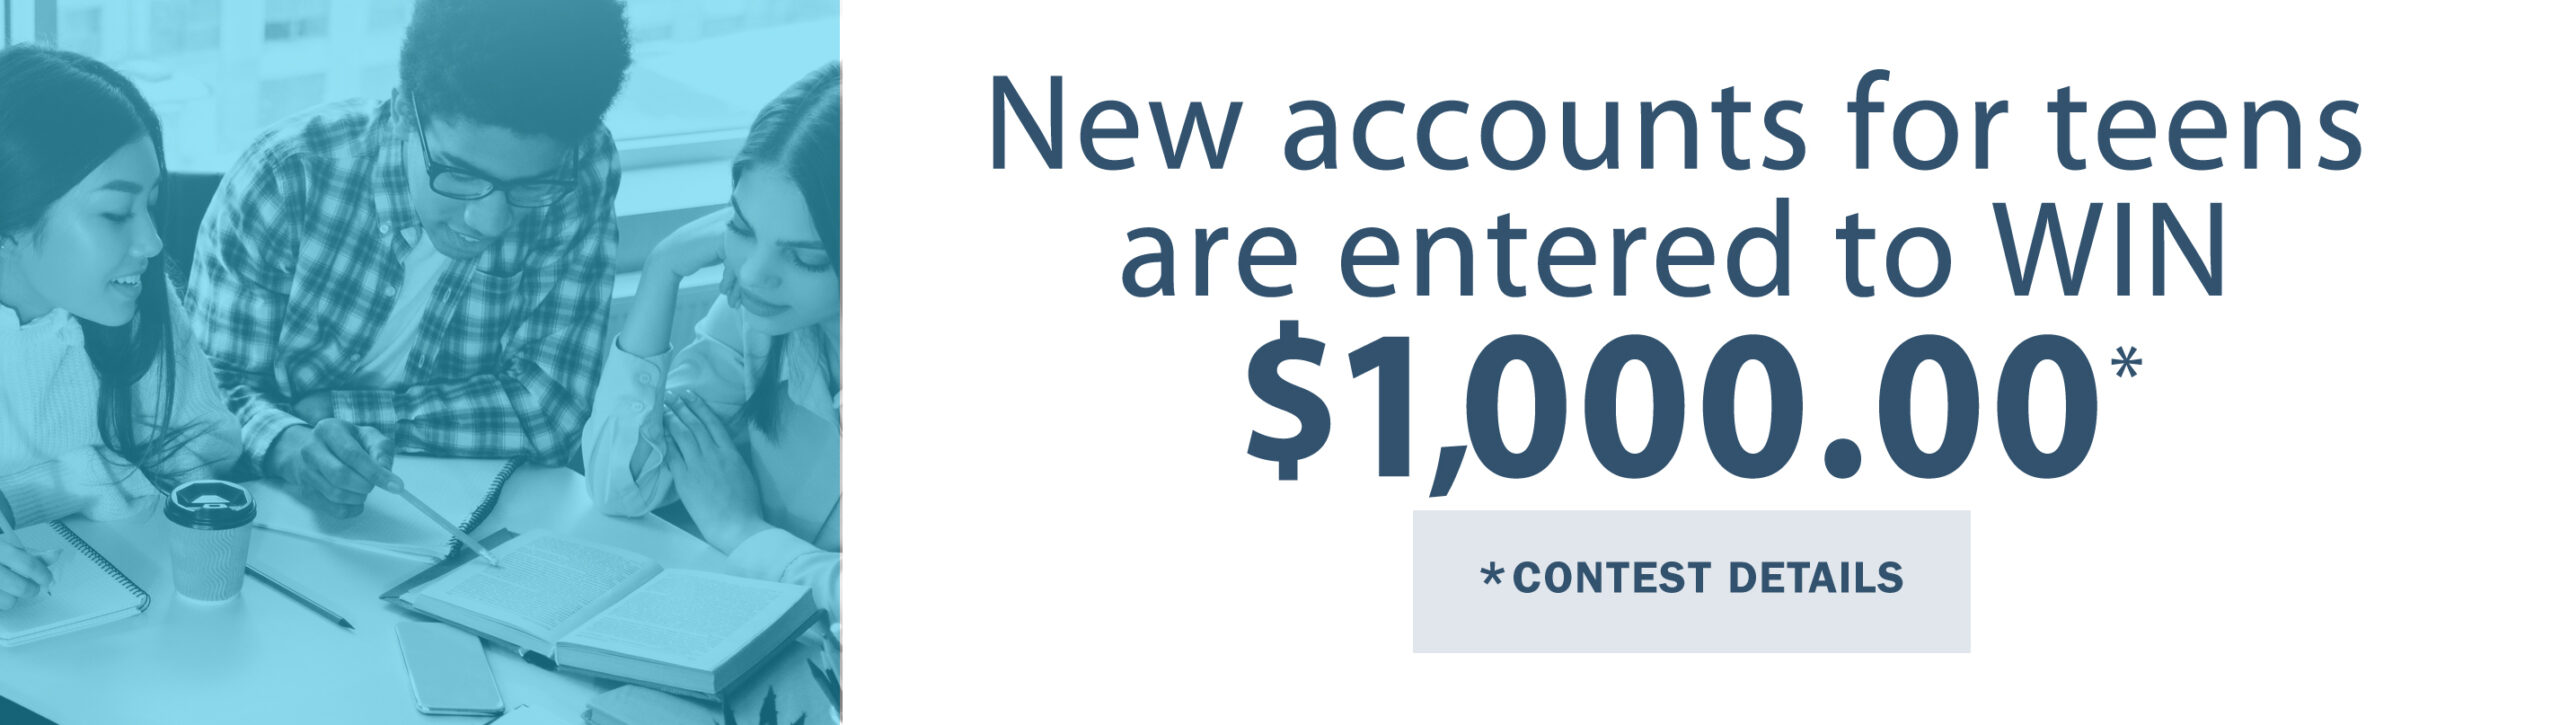 New teen accounts are entered to win $1,000.00 *contest details